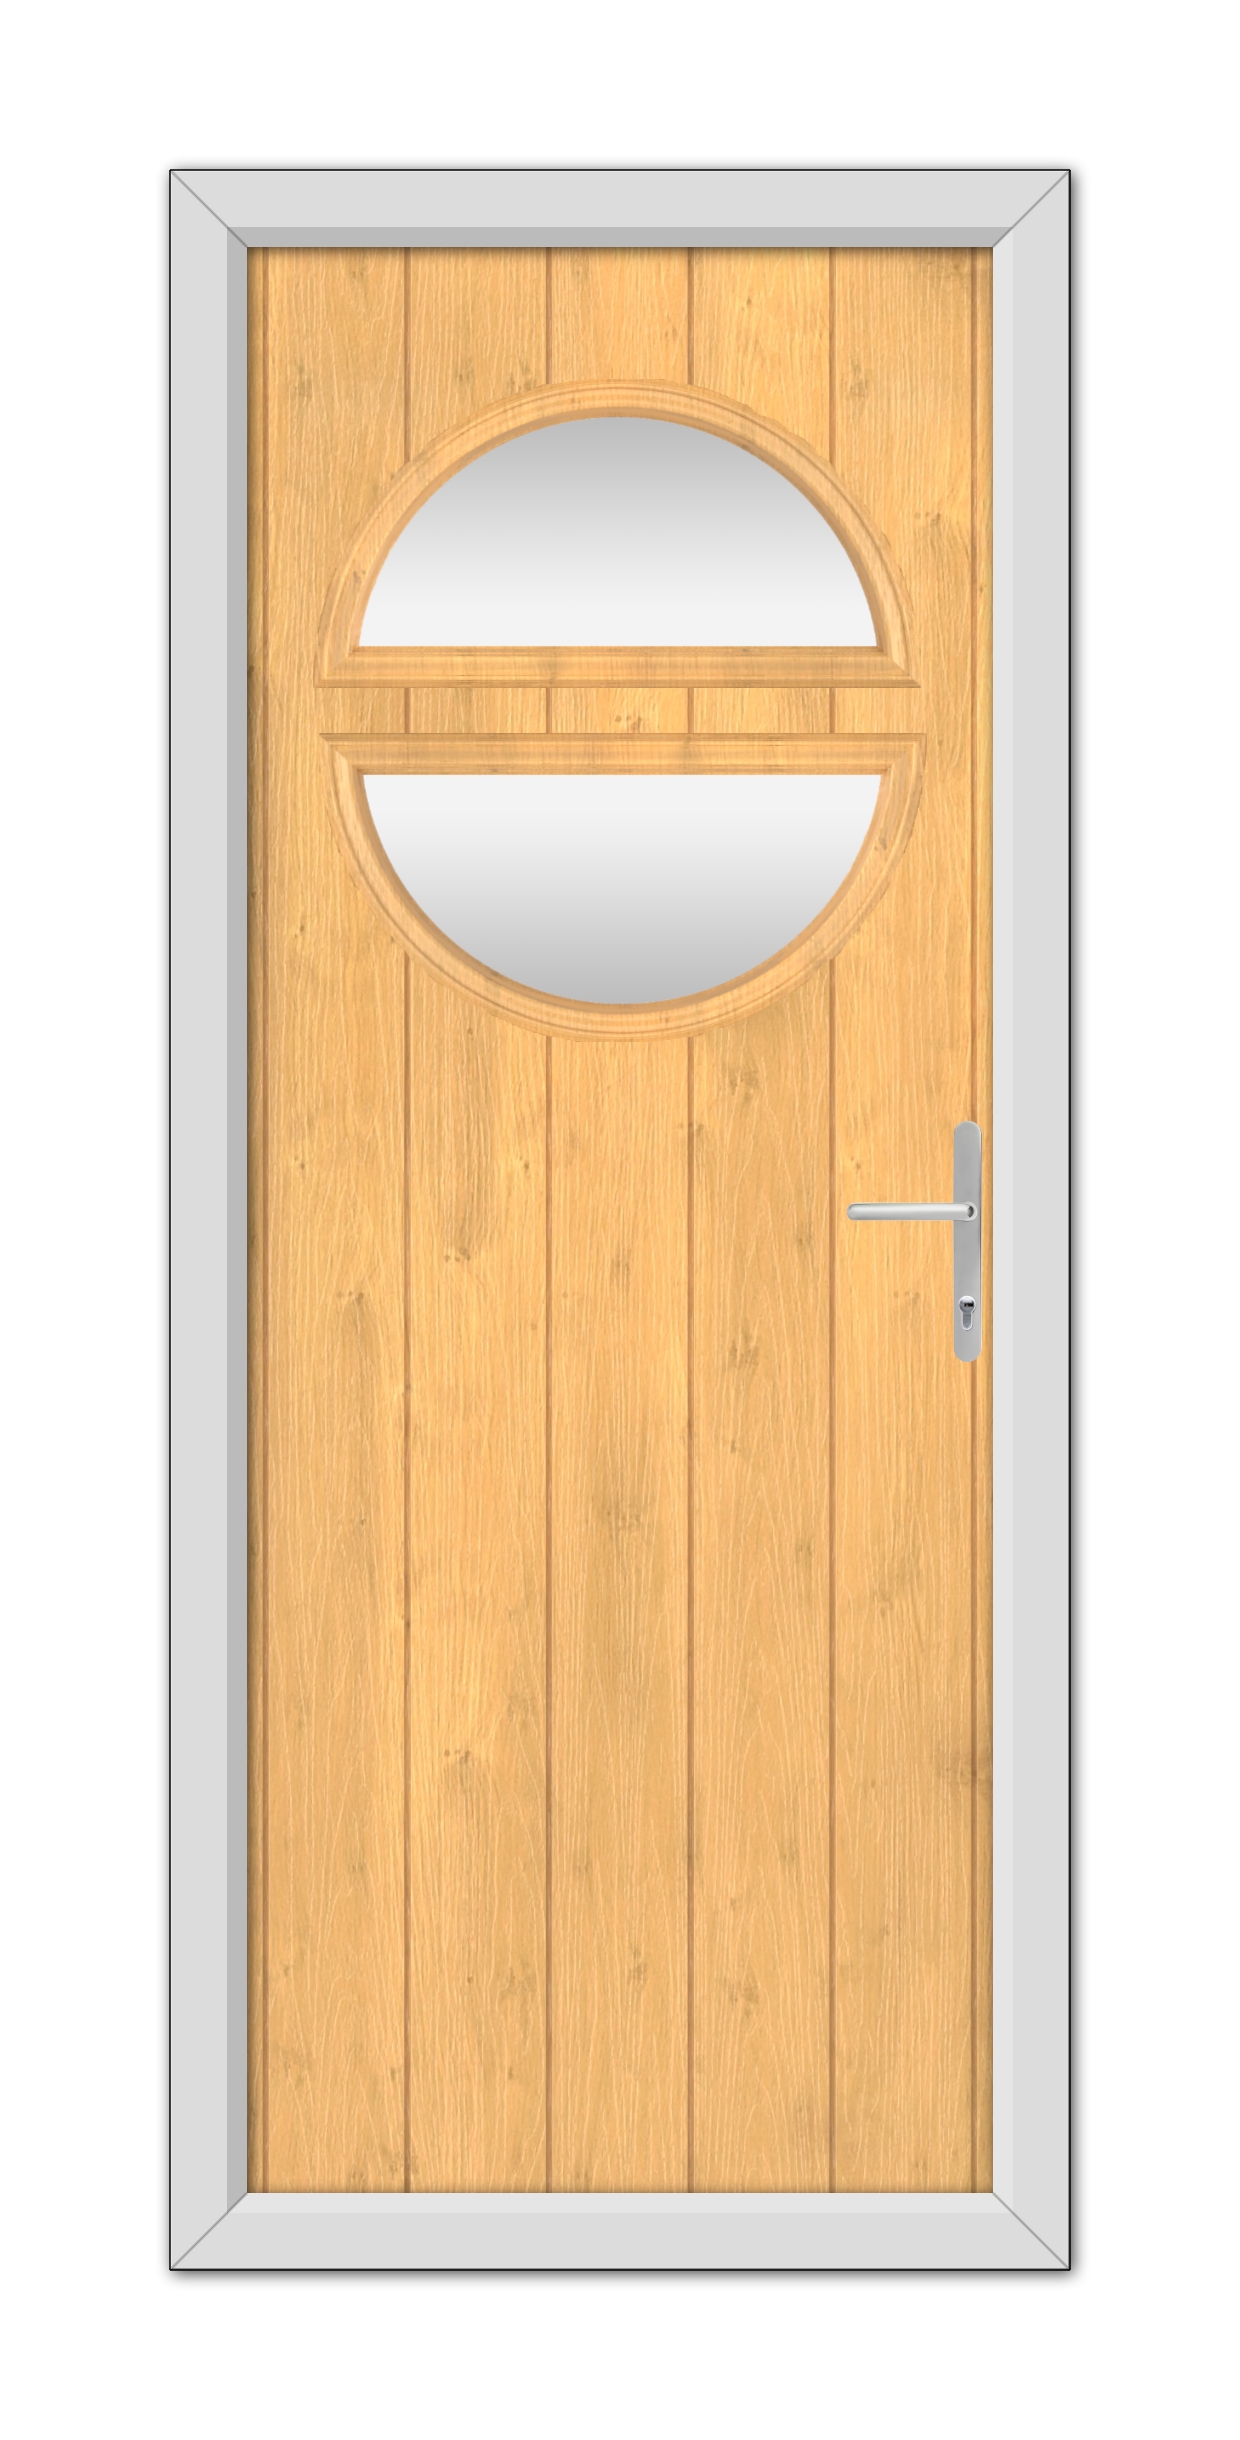 Irish Oak Kent Composite Door 48mm Timber Core with an oval glass window and a metallic handle, framed by a gray border, isolated on a white background.